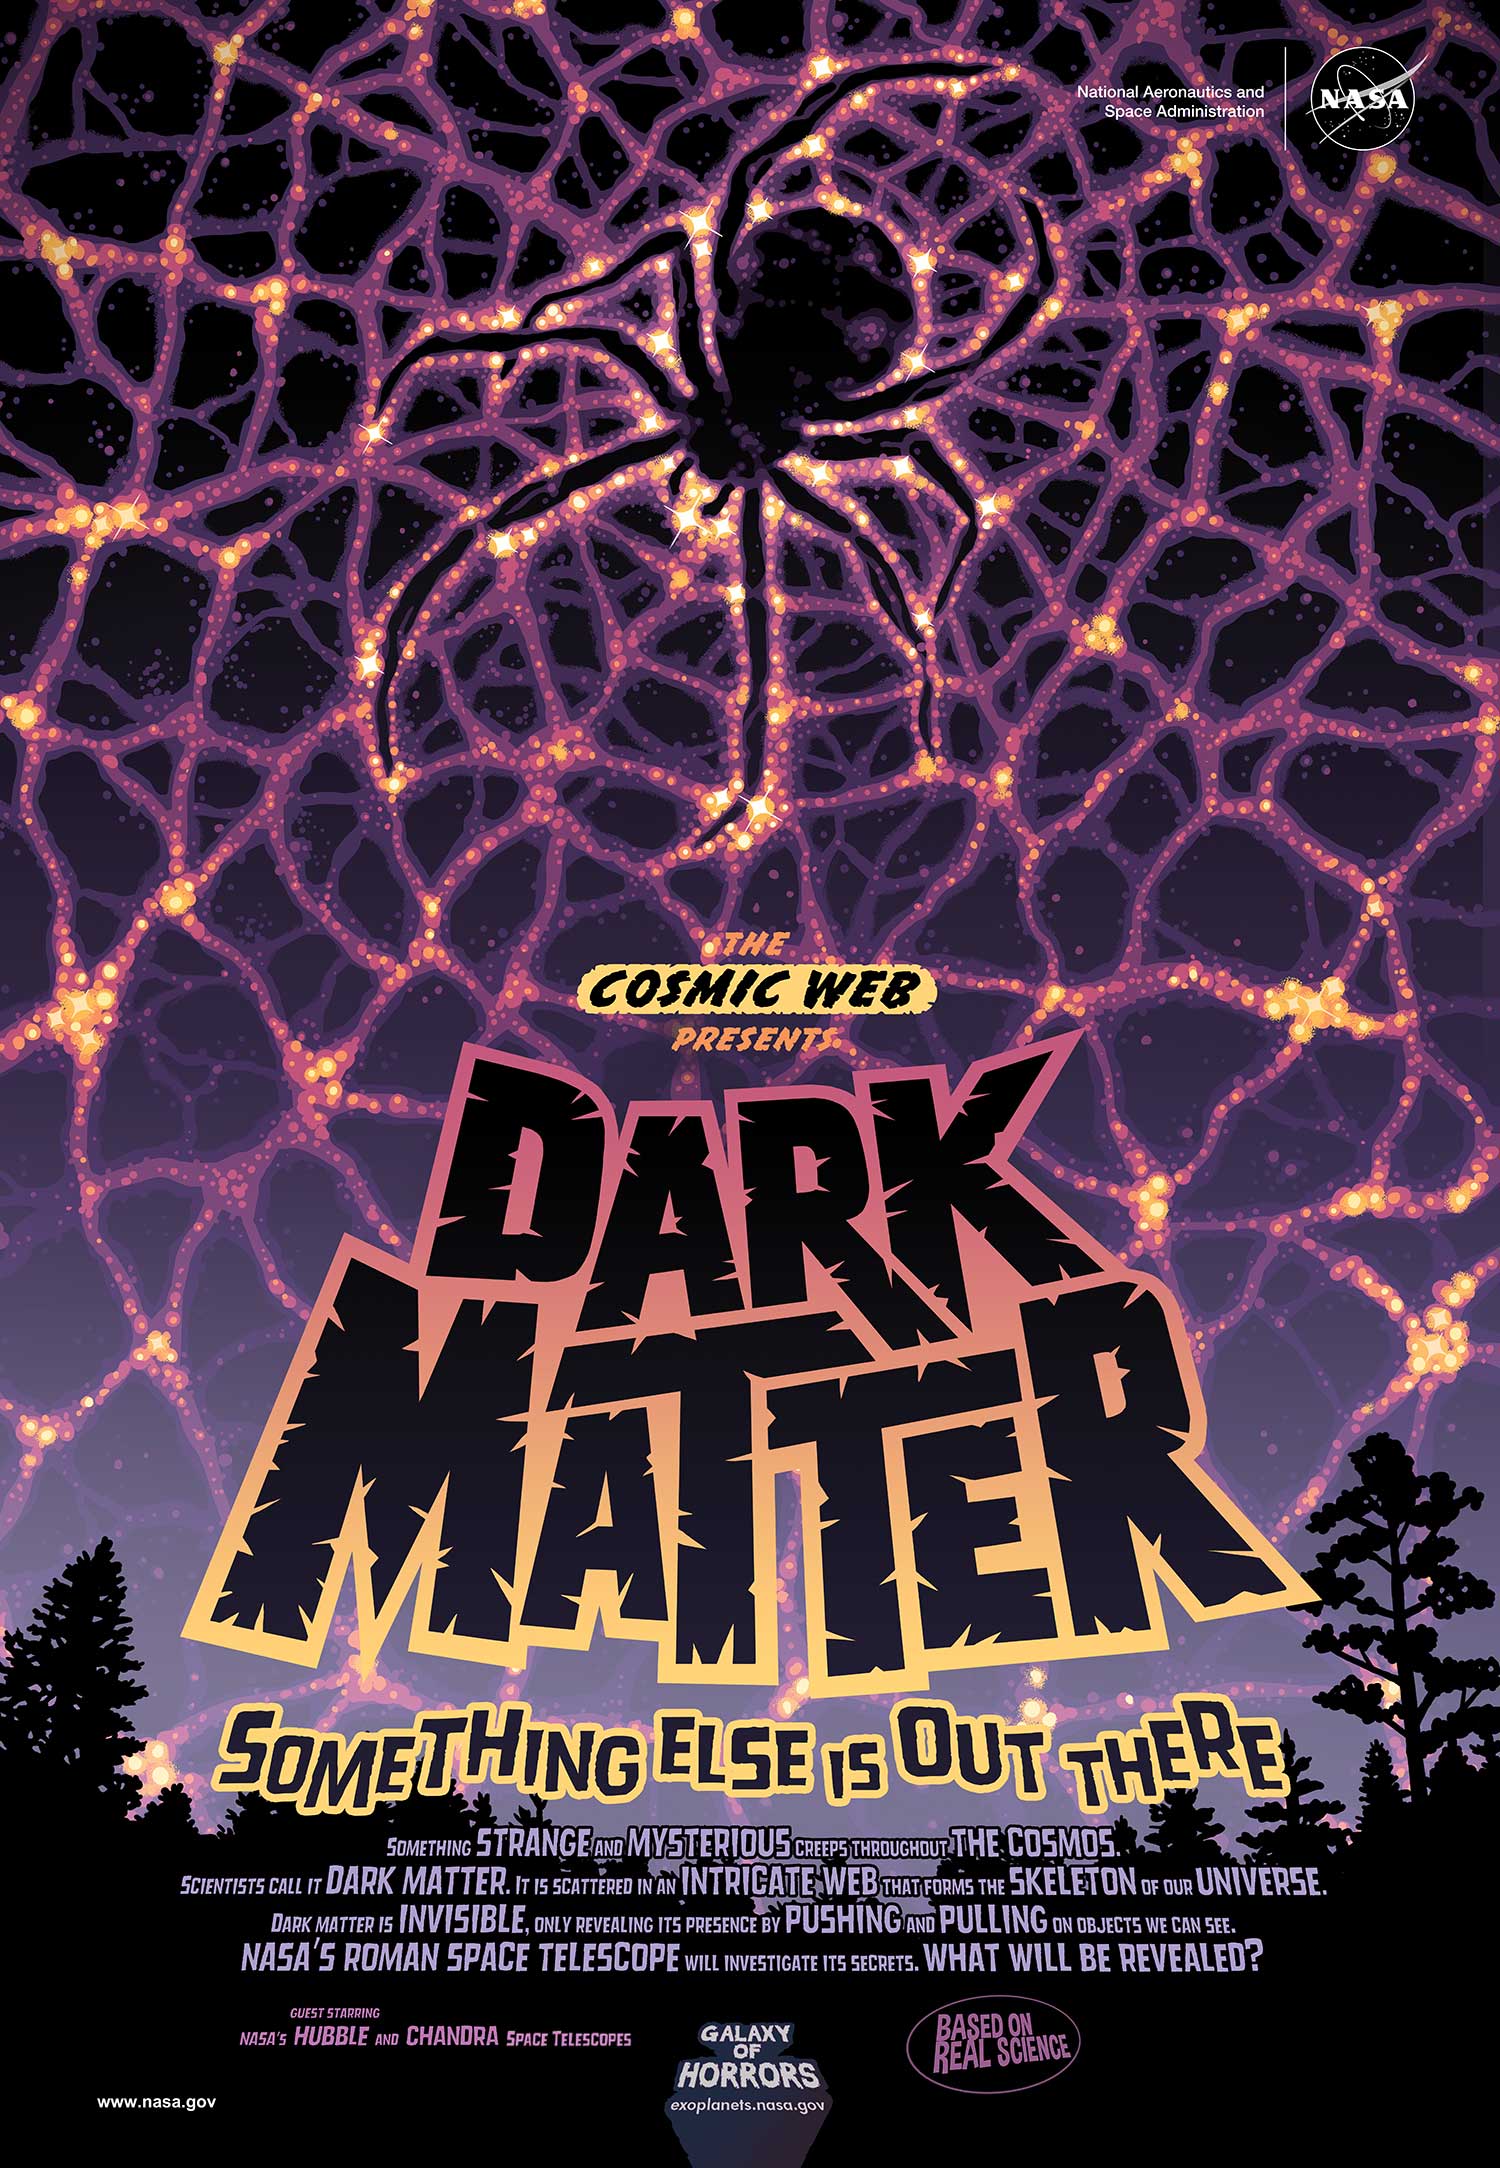 A luminous web is visible in the night sky beyond a treeline. Scattered between the nodes of the web is darkness, signifying the presence of dark matter. In the center of the web, the darkness melds to form the shape of a spider. 